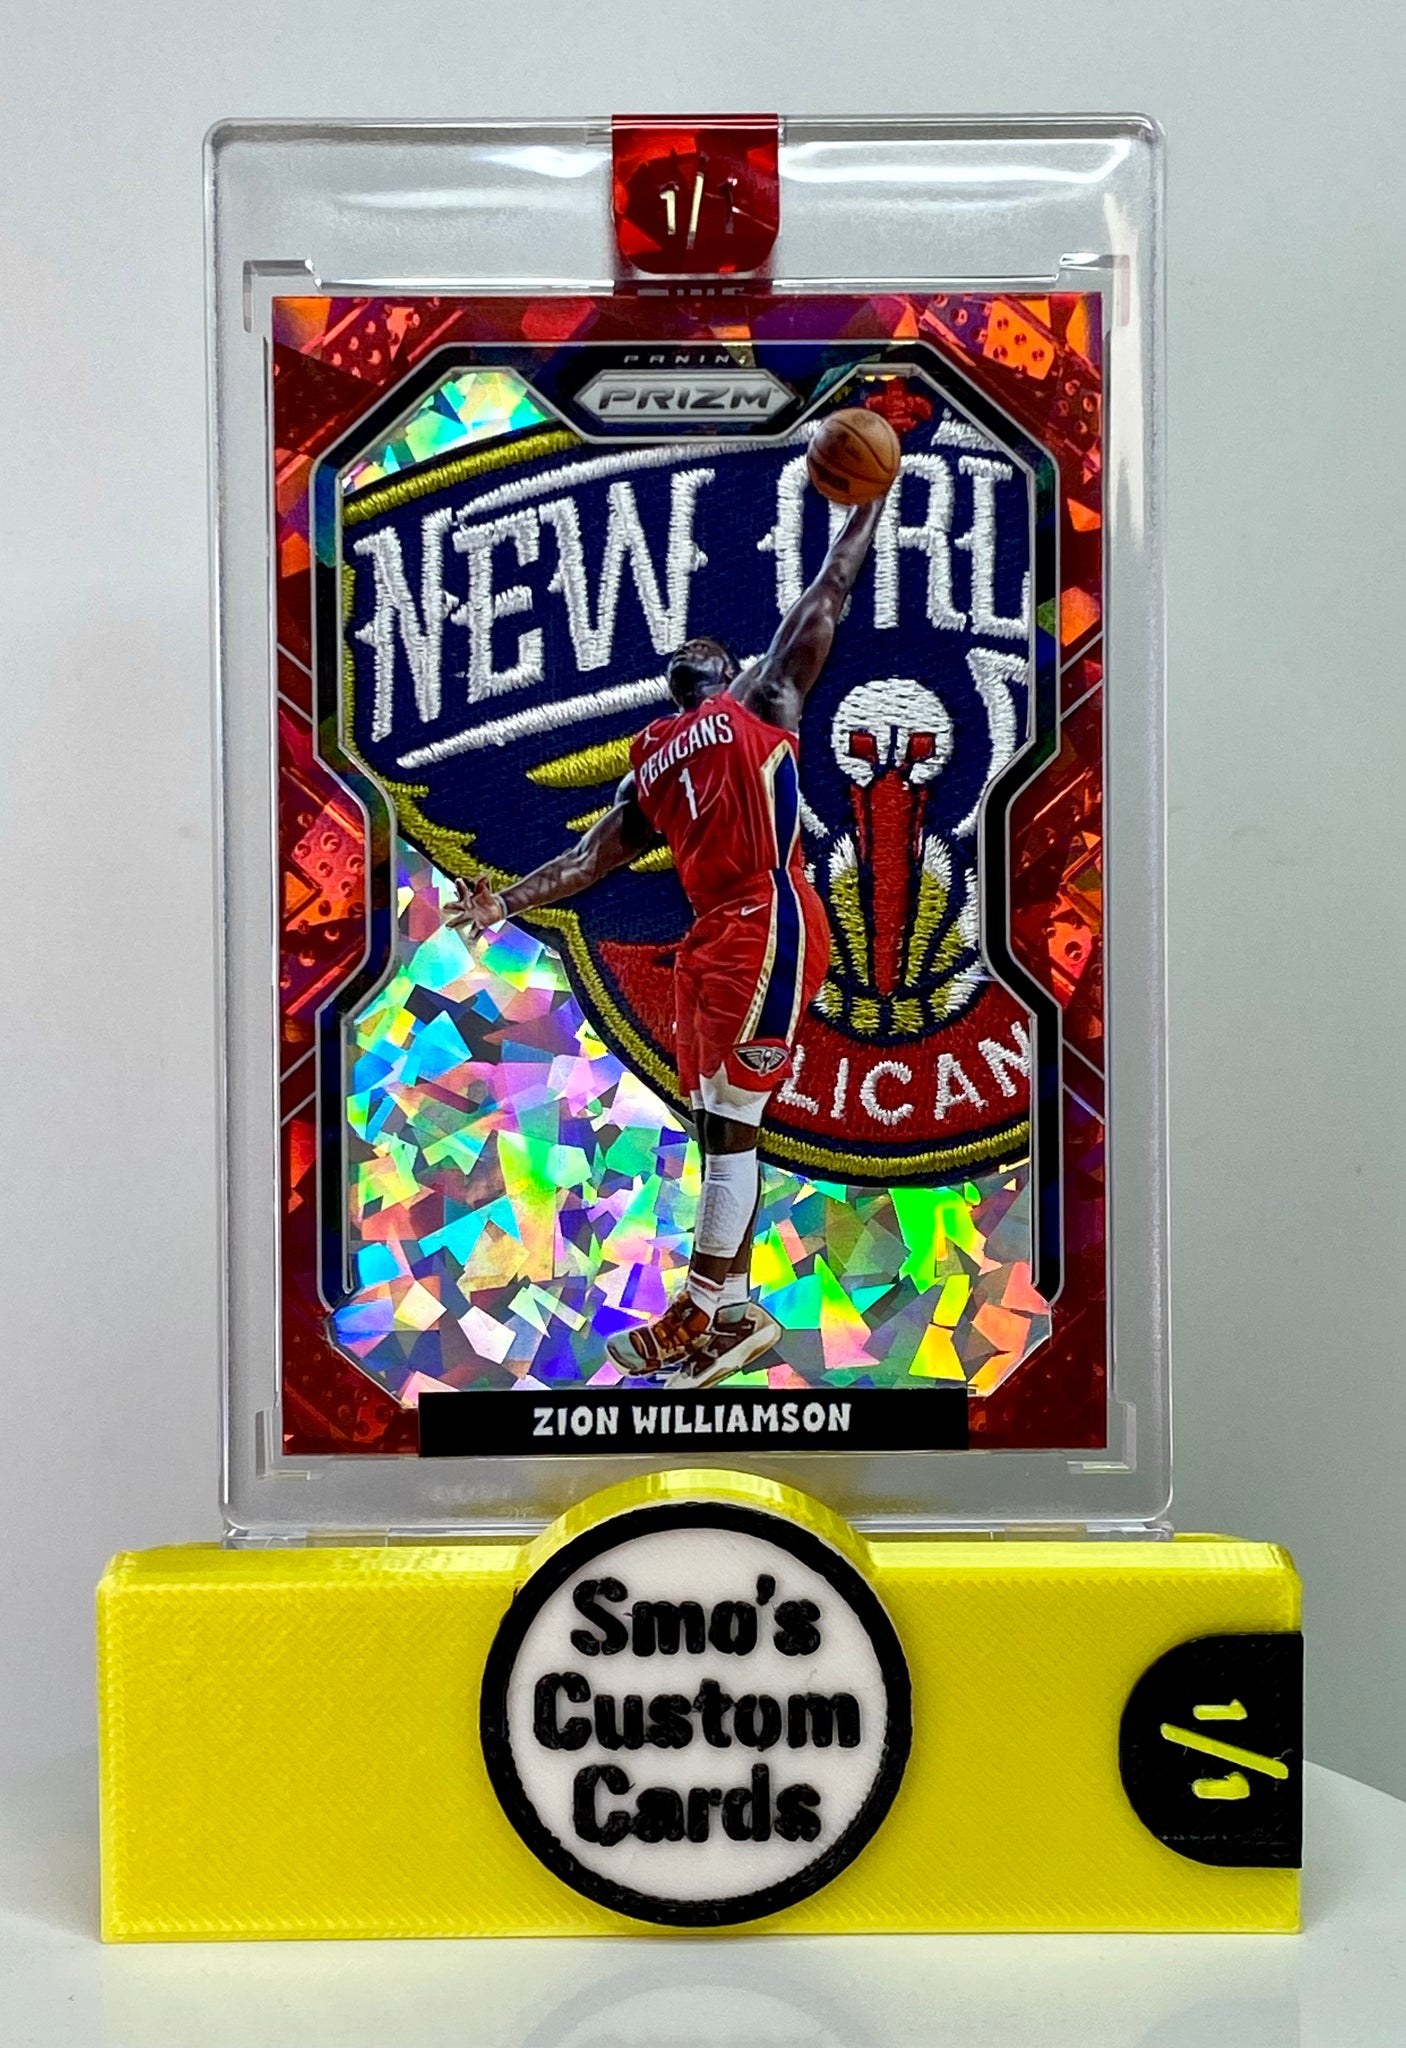 Zion Williamson Prizm Red Ice Dunk Pelicans Patch 1/1